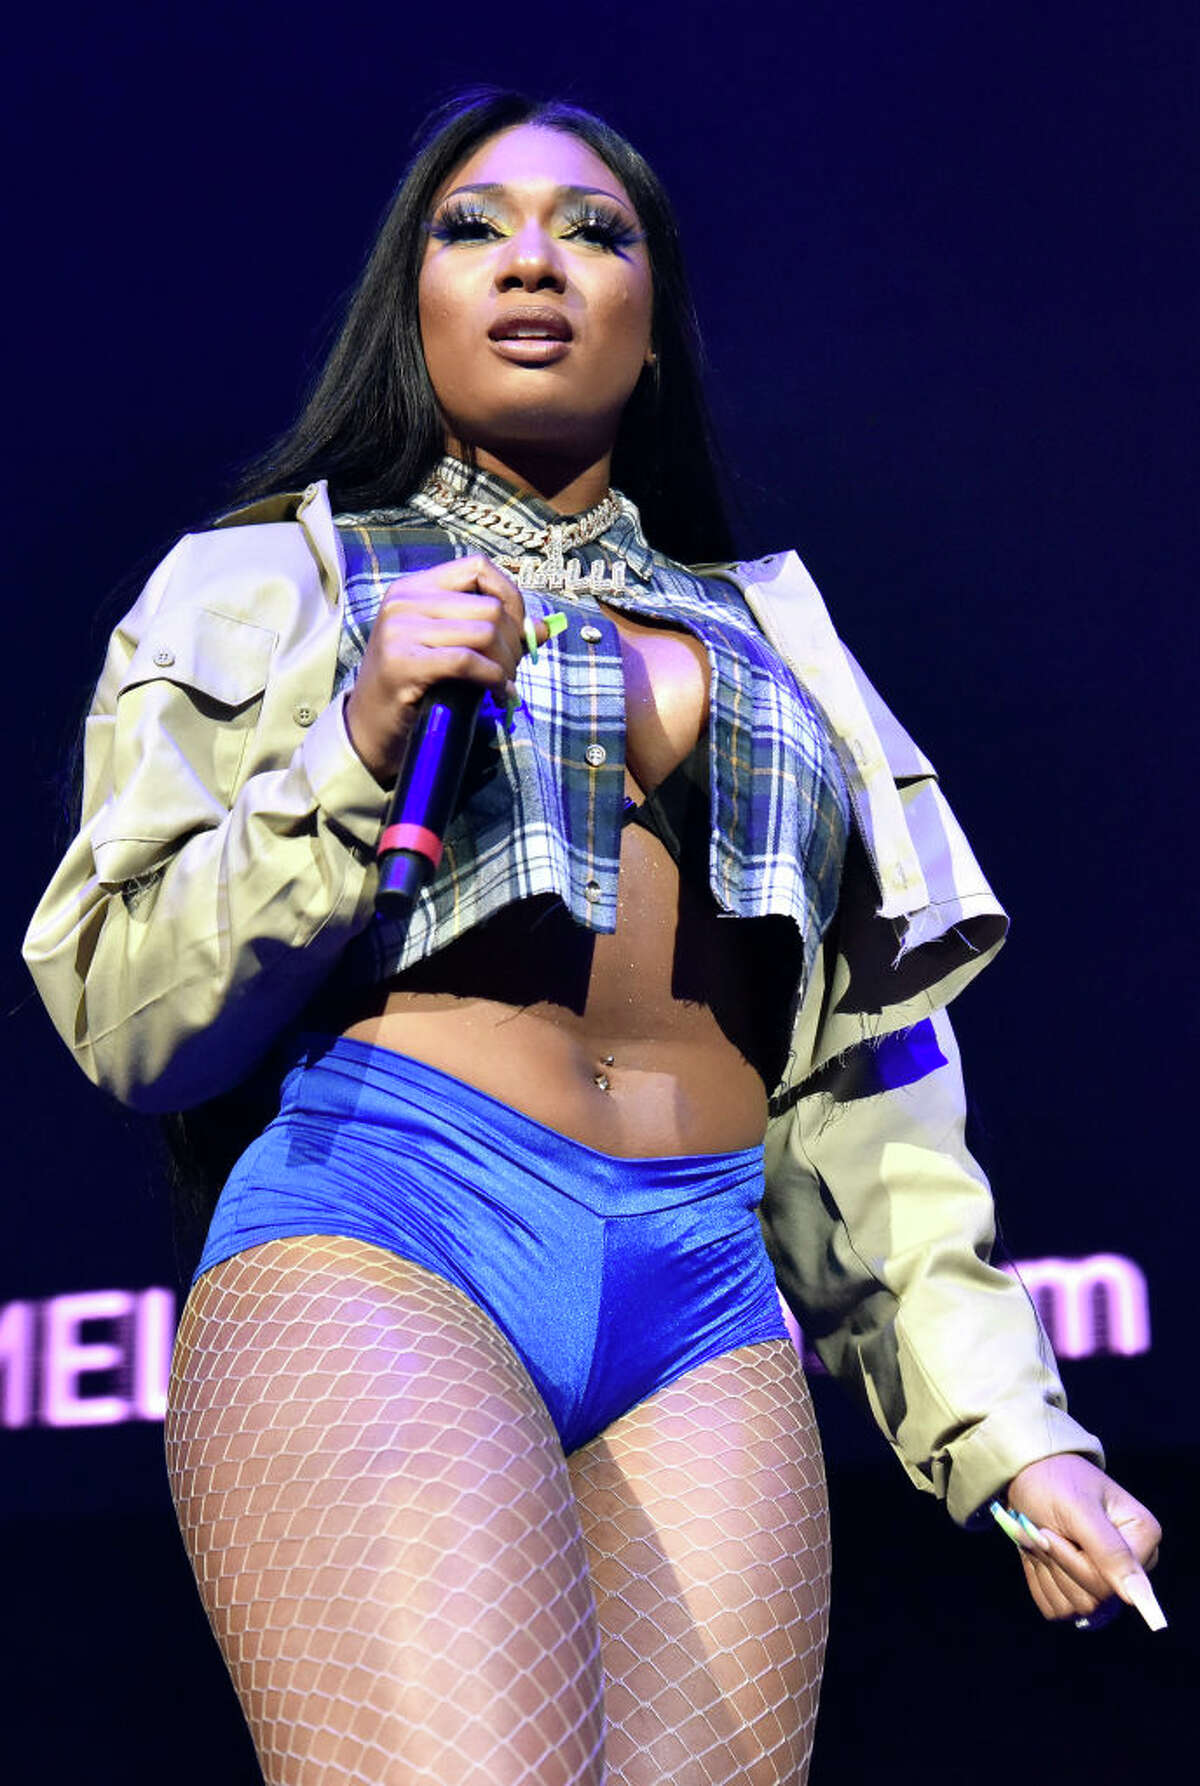 Houston's own Megan Thee Stallion samples N.W.A in latest track 'Girls